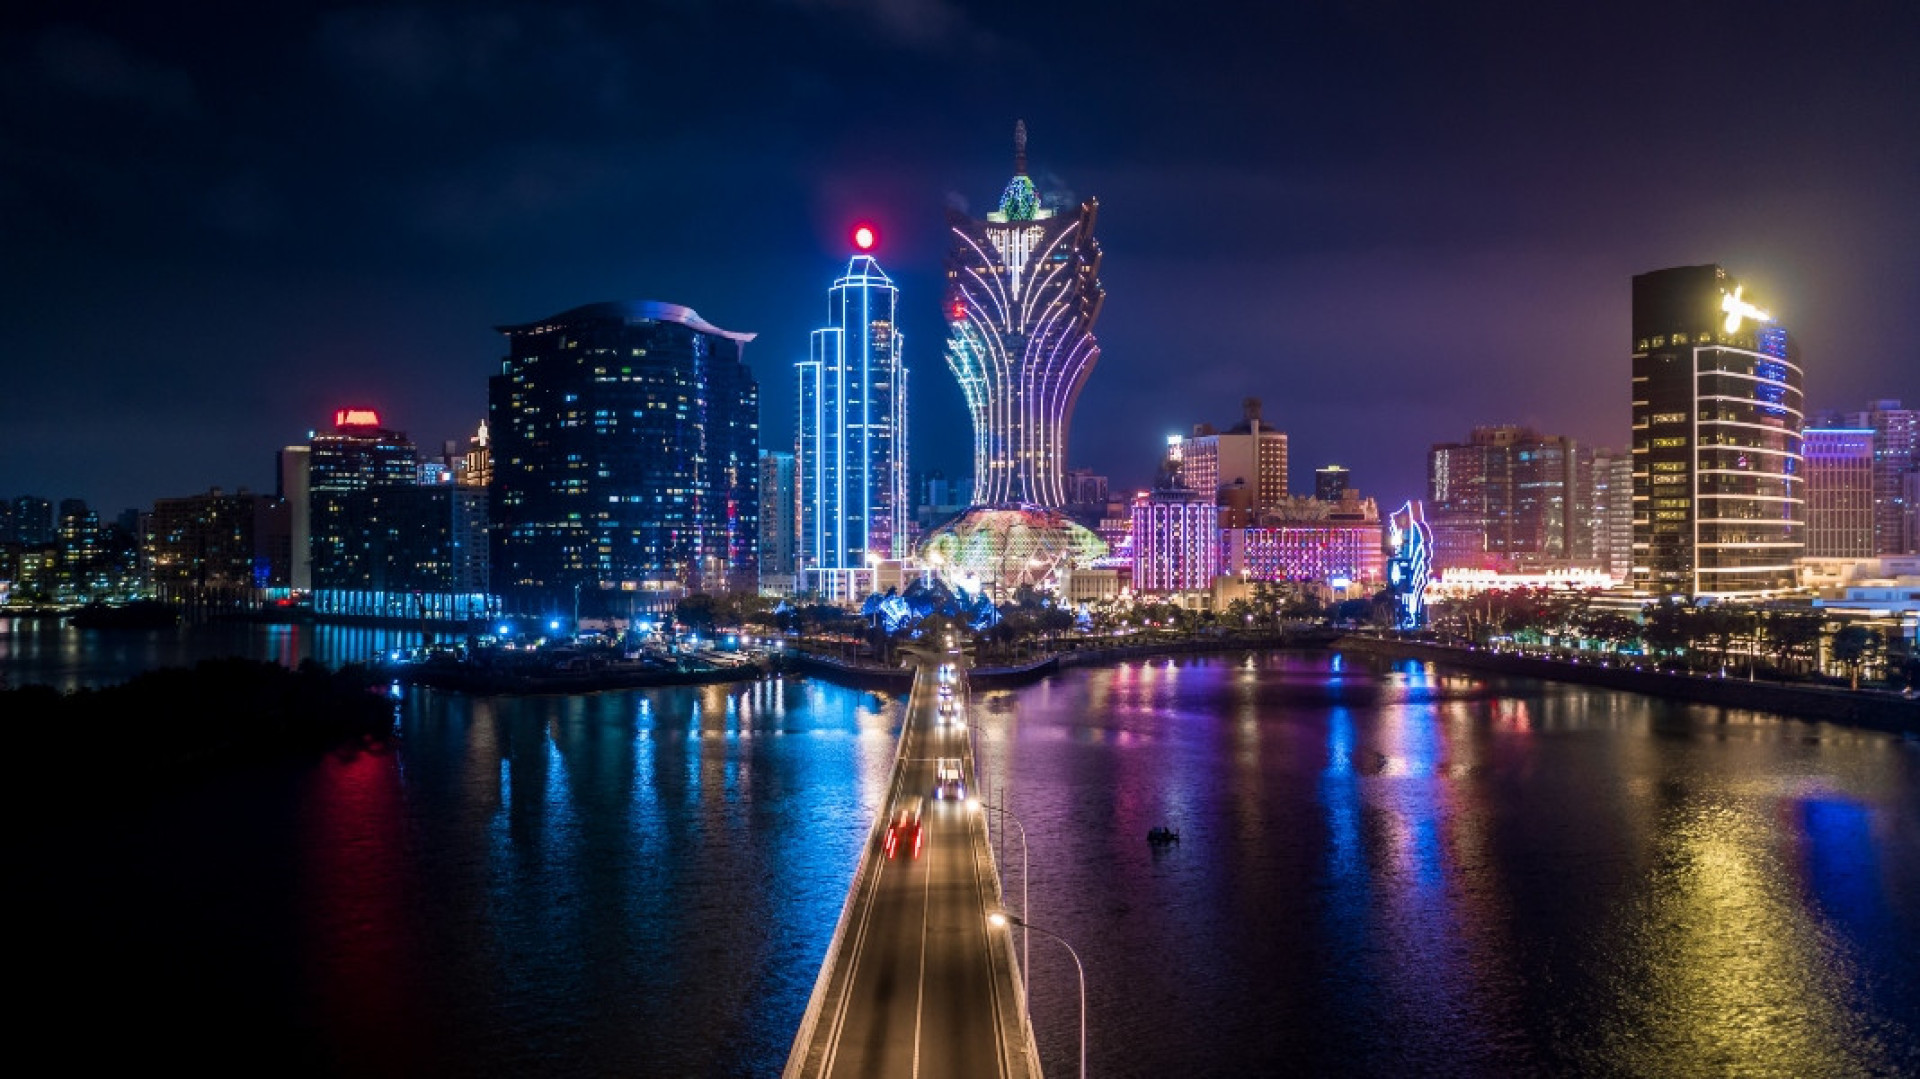 <p>Macau has clinched the third spot globally in terms of life expectancy. The region's focus on health and well-being has significantly benefited its population's longevity.</p><p>You may also like:<a href="https://www.starsinsider.com/n/499062?utm_source=msn.com&utm_medium=display&utm_campaign=referral_description&utm_content=582401en-en"> History's most admirable feats of activism</a></p>